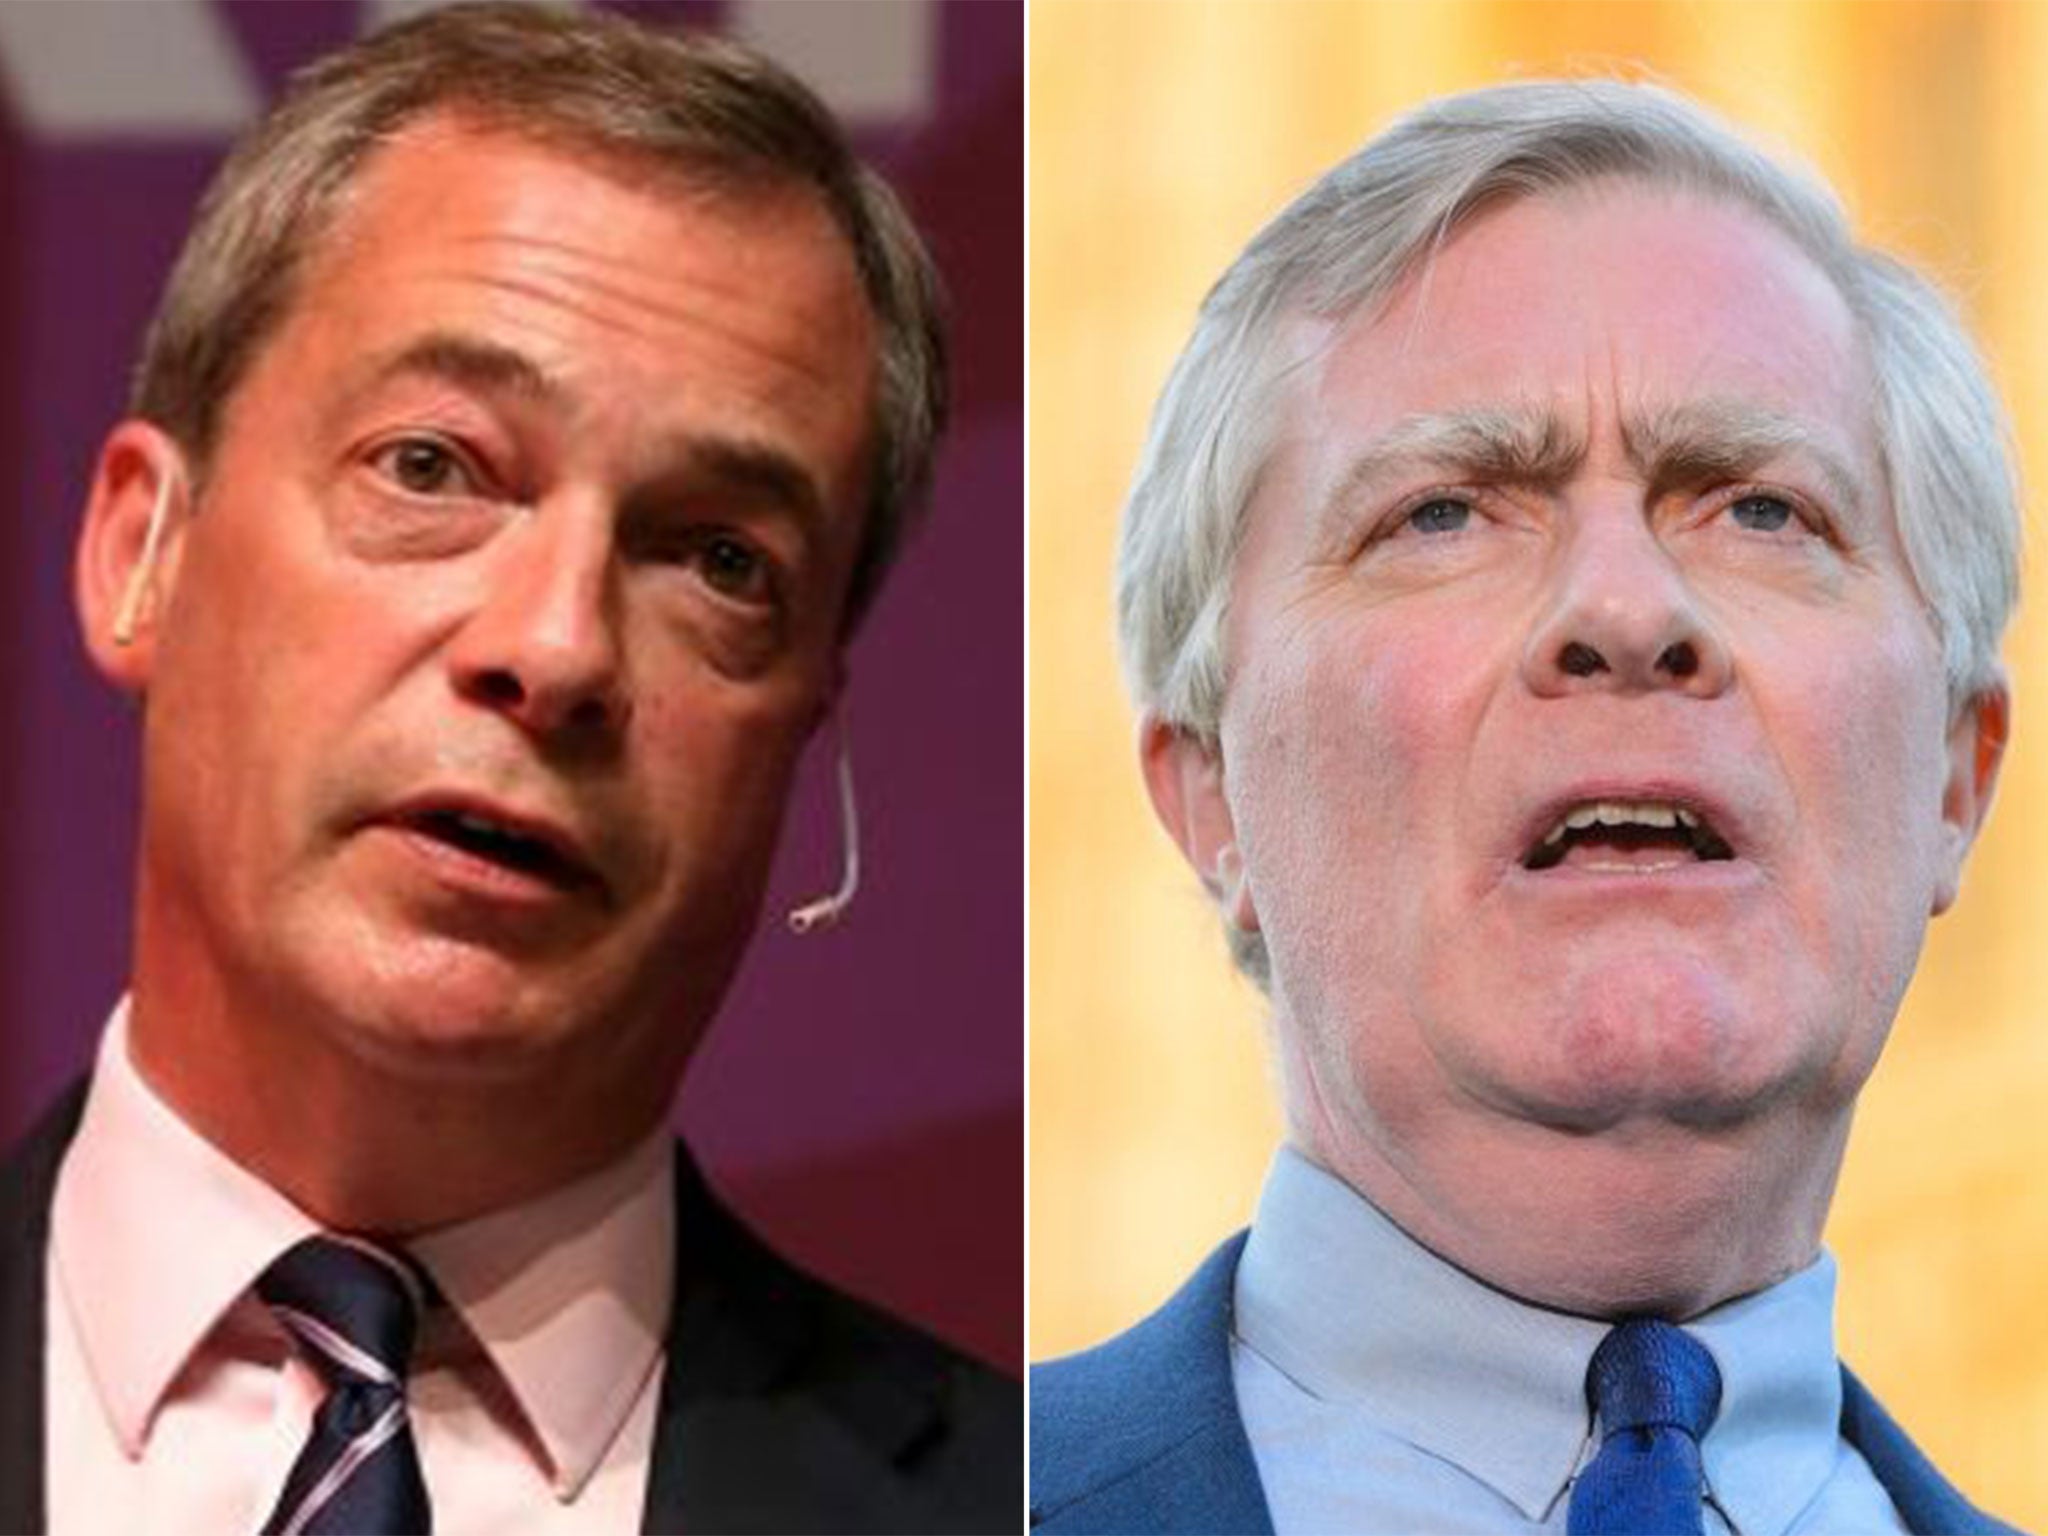 Ukip leader Nigel Farage, left, says he may contest Patrick Mercer's former Newark seat in a by-election